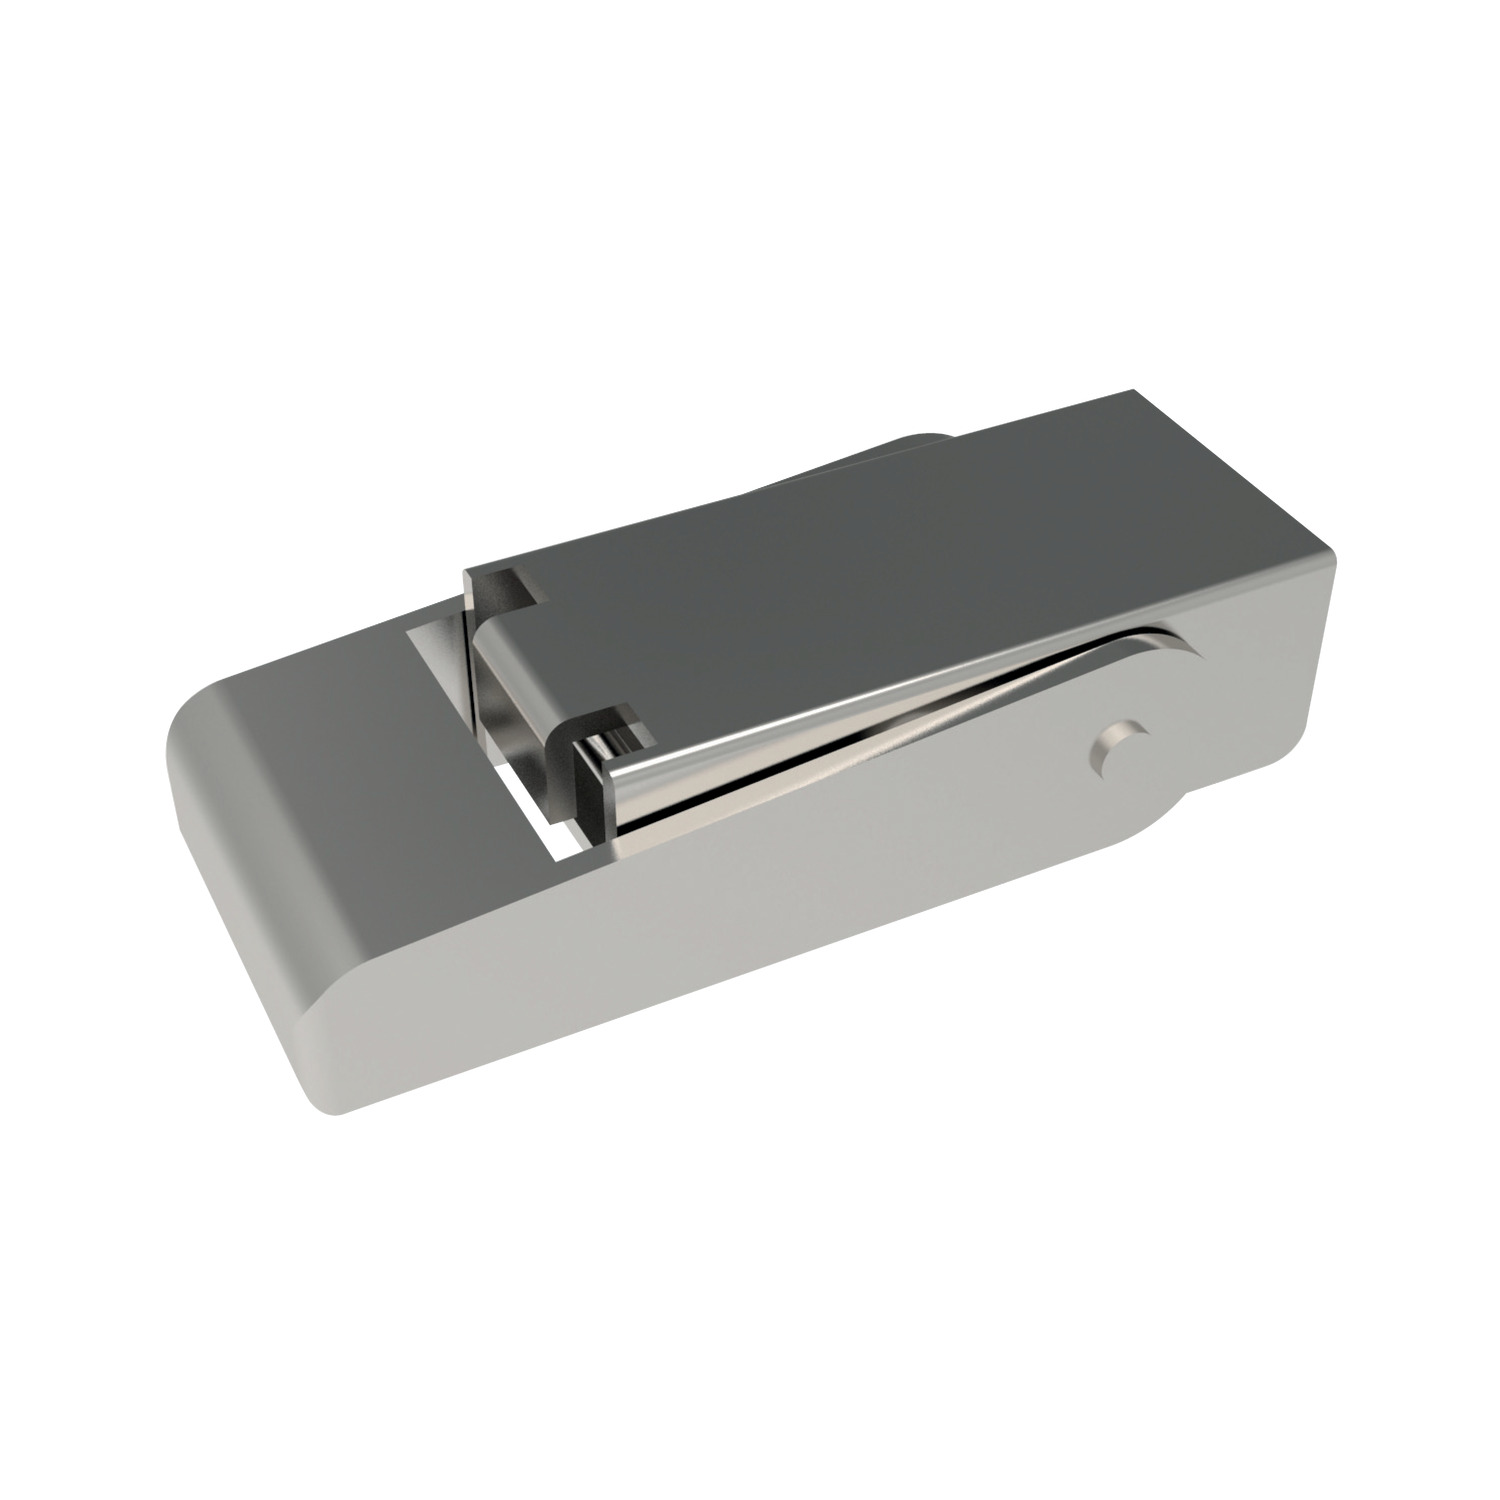 Product J0360, Draw Latches stainless steel / 